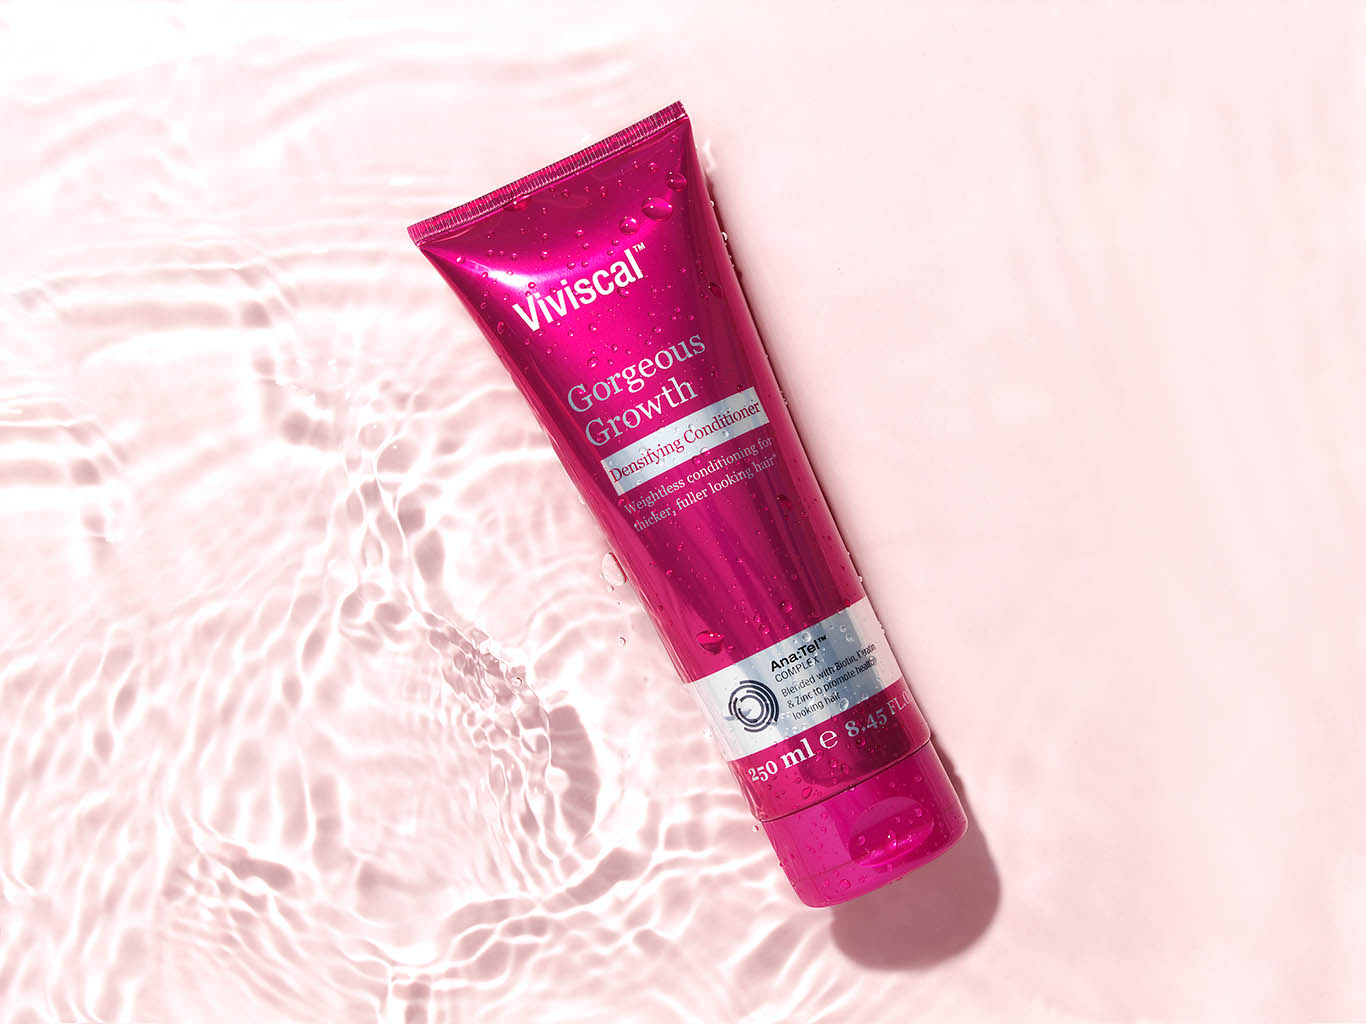 Packshot Factory - Haircare - Viviscal conditioner tube in water